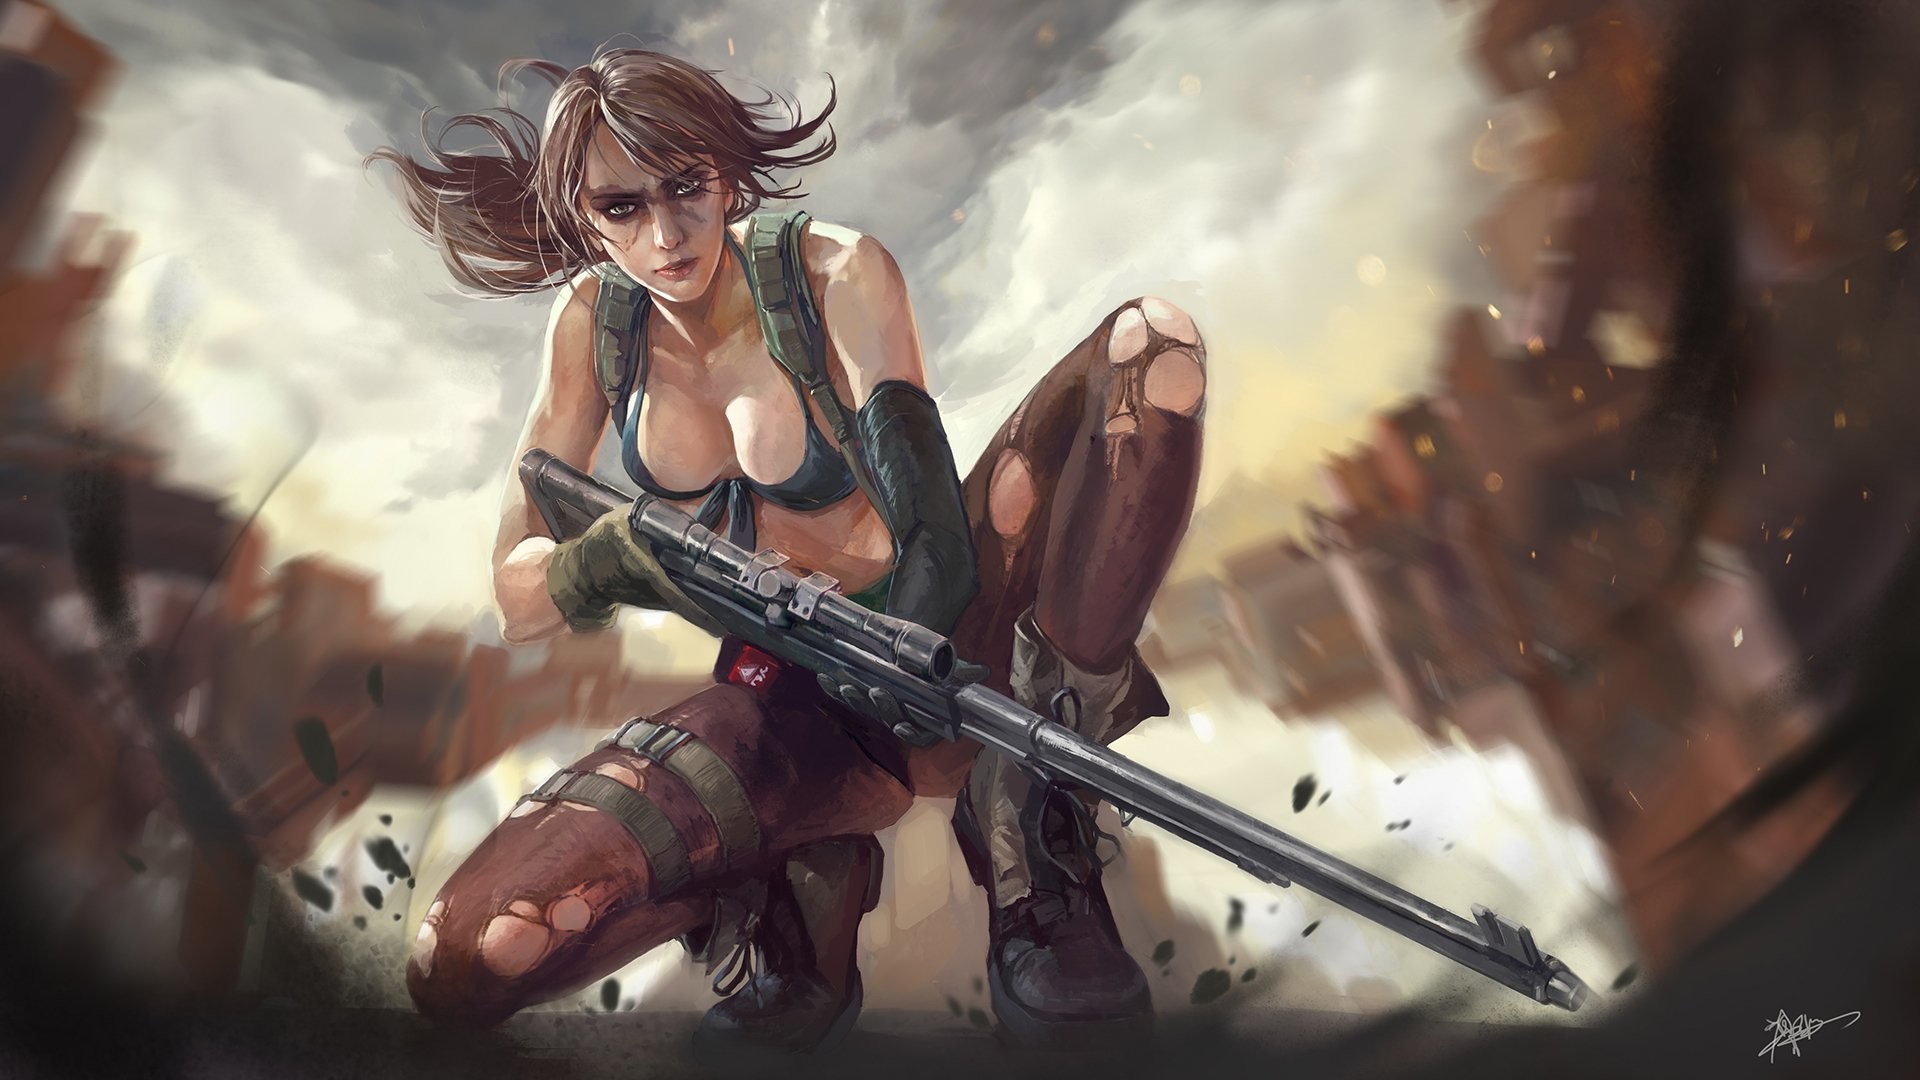 1920x1080 352 Metal Gear Solid HD Wallpapers | Backgrounds - Wallpaper Abyss